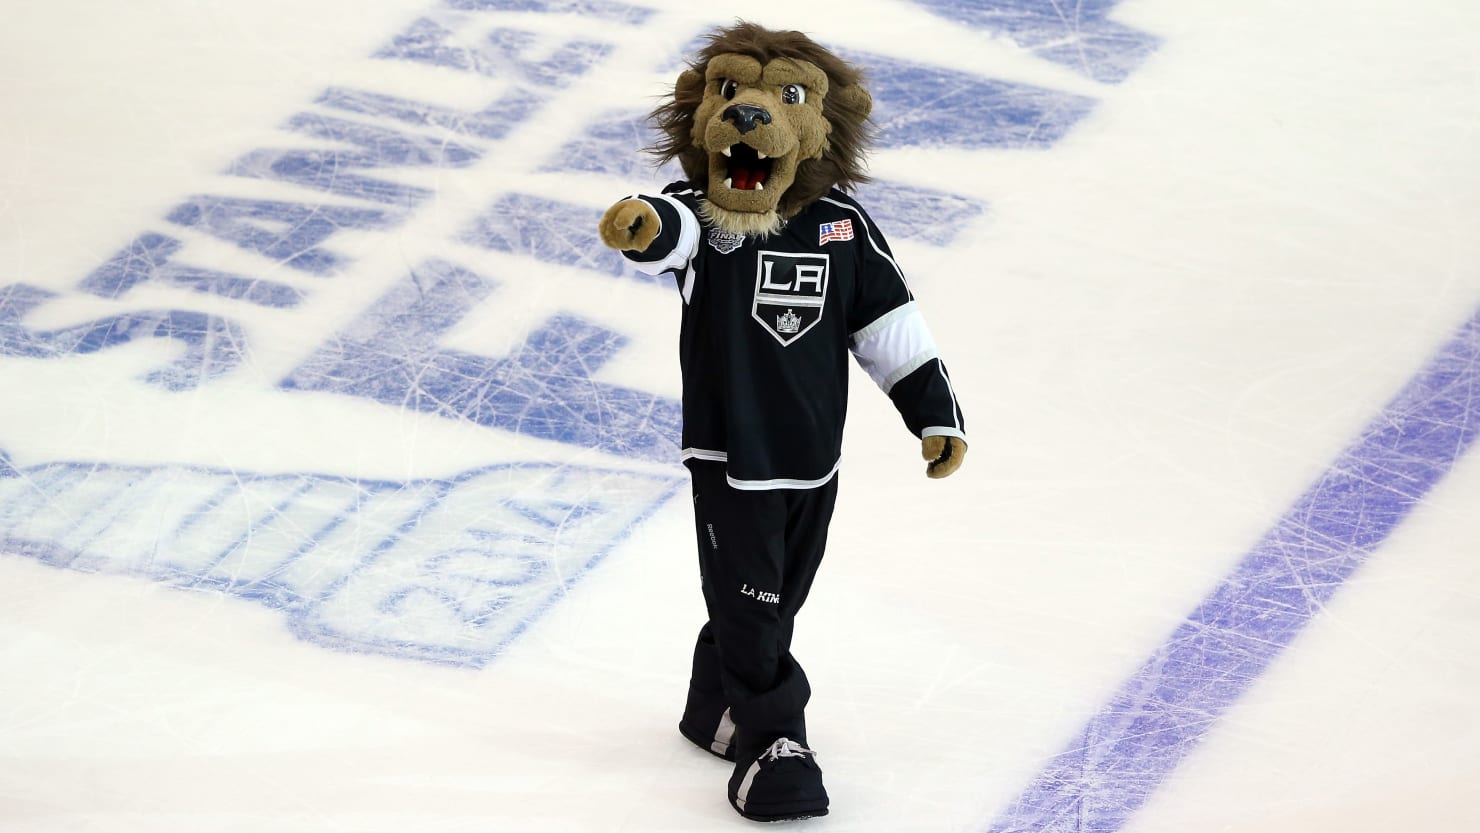 Lawsuit alleges inappropriate behavior by L.A. Kings' mascot